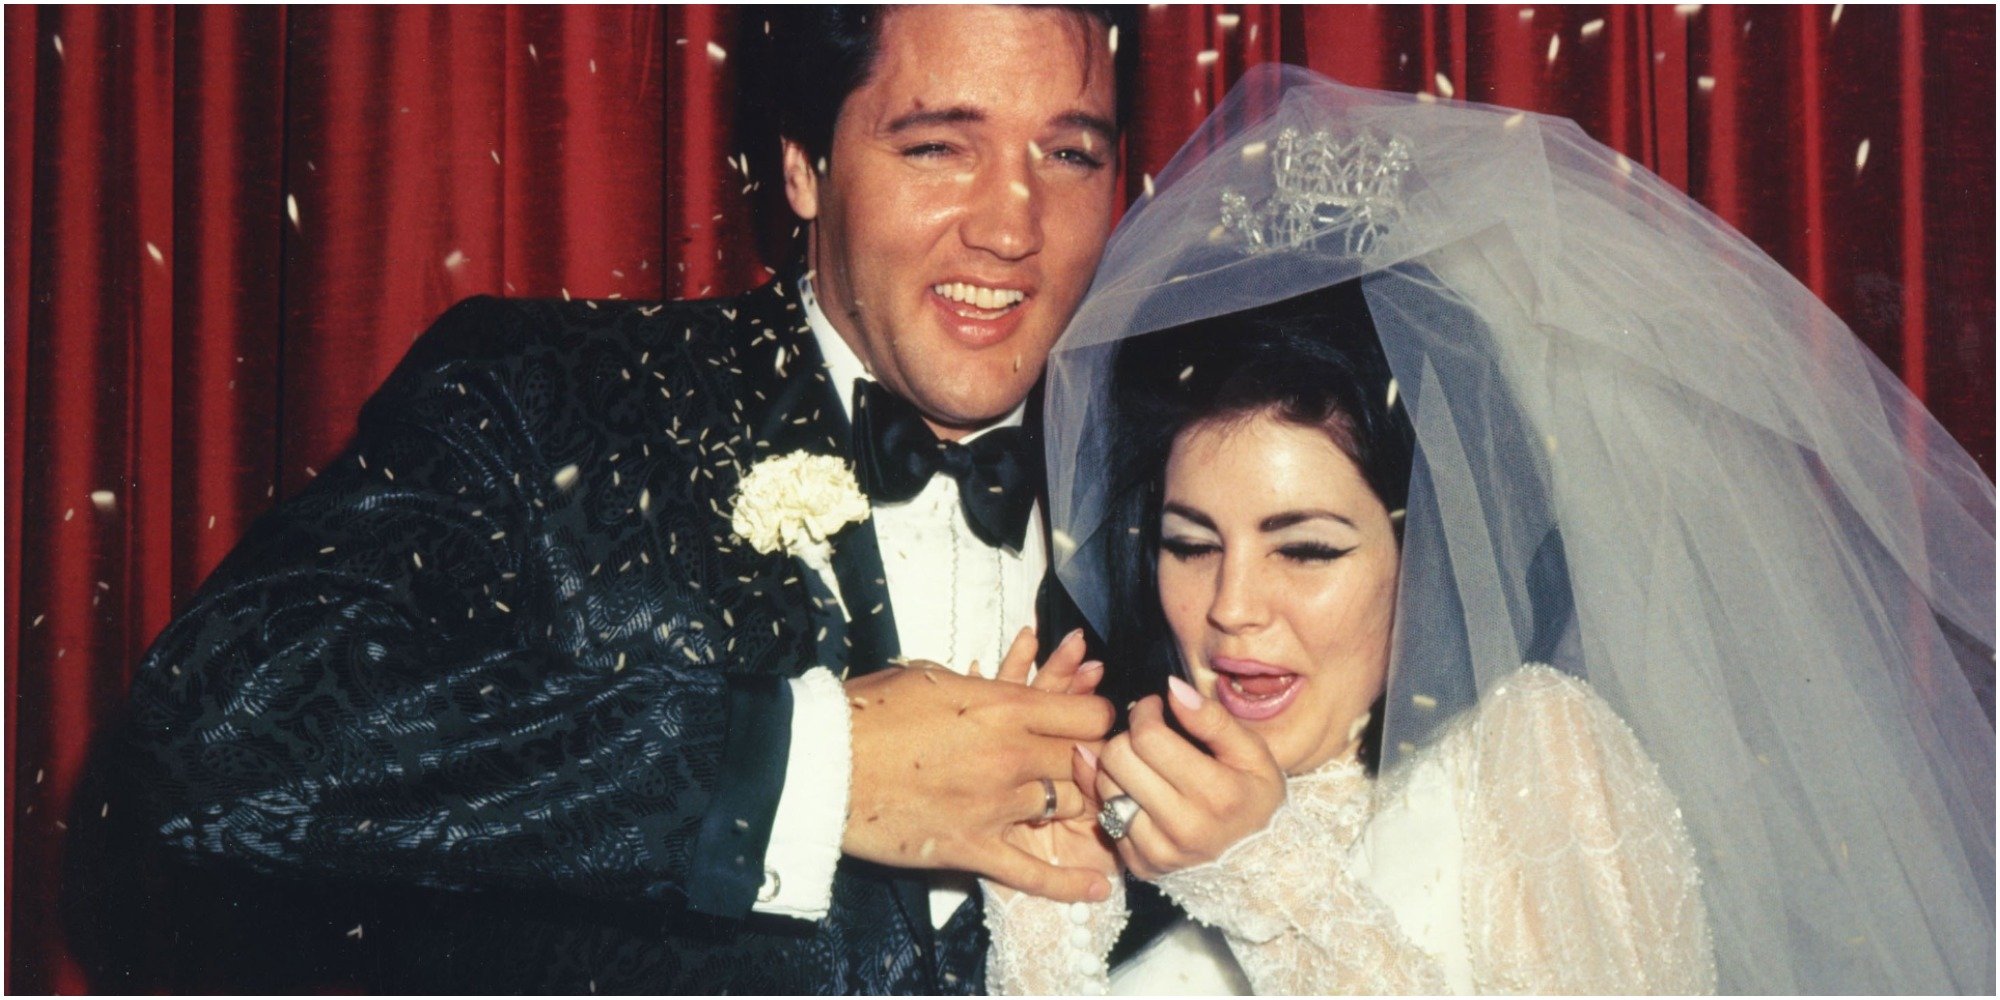 Elvis and Priscilla Presley’s Wedding Reception Featured The Strangest Early-Morning Menu